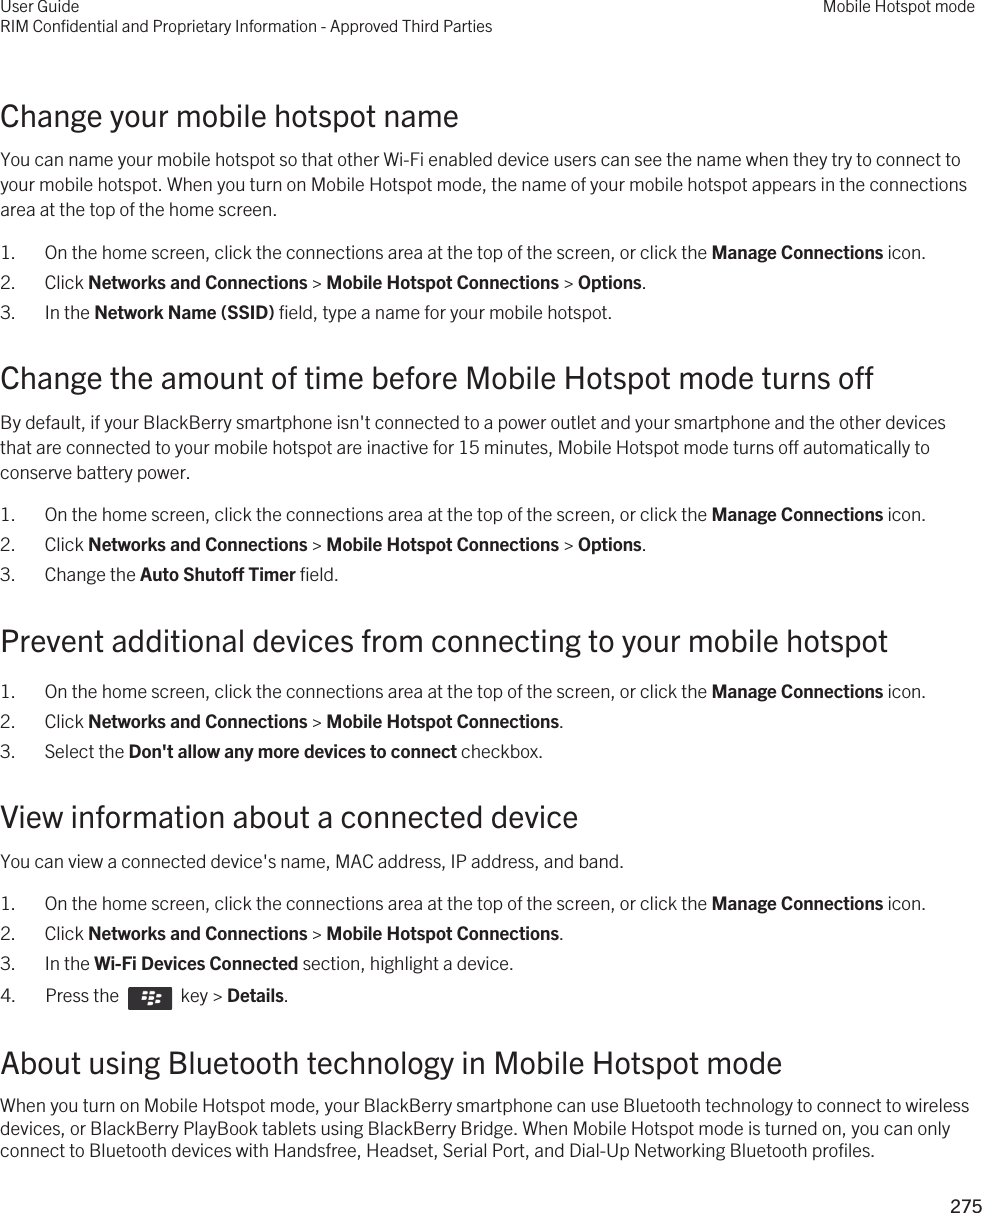 Change your mobile hotspot nameYou can name your mobile hotspot so that other Wi-Fi enabled device users can see the name when they try to connect to your mobile hotspot. When you turn on Mobile Hotspot mode, the name of your mobile hotspot appears in the connections area at the top of the home screen.1. On the home screen, click the connections area at the top of the screen, or click the Manage Connections icon.2. Click Networks and Connections &gt; Mobile Hotspot Connections &gt; Options.3. In the Network Name (SSID) field, type a name for your mobile hotspot.Change the amount of time before Mobile Hotspot mode turns offBy default, if your BlackBerry smartphone isn&apos;t connected to a power outlet and your smartphone and the other devices that are connected to your mobile hotspot are inactive for 15 minutes, Mobile Hotspot mode turns off automatically to conserve battery power.1. On the home screen, click the connections area at the top of the screen, or click the Manage Connections icon.2. Click Networks and Connections &gt; Mobile Hotspot Connections &gt; Options.3. Change the Auto Shutoff Timer field.Prevent additional devices from connecting to your mobile hotspot1. On the home screen, click the connections area at the top of the screen, or click the Manage Connections icon.2. Click Networks and Connections &gt; Mobile Hotspot Connections.3. Select the Don&apos;t allow any more devices to connect checkbox.View information about a connected deviceYou can view a connected device&apos;s name, MAC address, IP address, and band.1. On the home screen, click the connections area at the top of the screen, or click the Manage Connections icon.2. Click Networks and Connections &gt; Mobile Hotspot Connections.3. In the Wi-Fi Devices Connected section, highlight a device.4.  Press the    key &gt; Details.About using Bluetooth technology in Mobile Hotspot modeWhen you turn on Mobile Hotspot mode, your BlackBerry smartphone can use Bluetooth technology to connect to wireless devices, or BlackBerry PlayBook tablets using BlackBerry Bridge. When Mobile Hotspot mode is turned on, you can only connect to Bluetooth devices with Handsfree, Headset, Serial Port, and Dial-Up Networking Bluetooth profiles.User GuideRIM Confidential and Proprietary Information - Approved Third PartiesMobile Hotspot mode275 